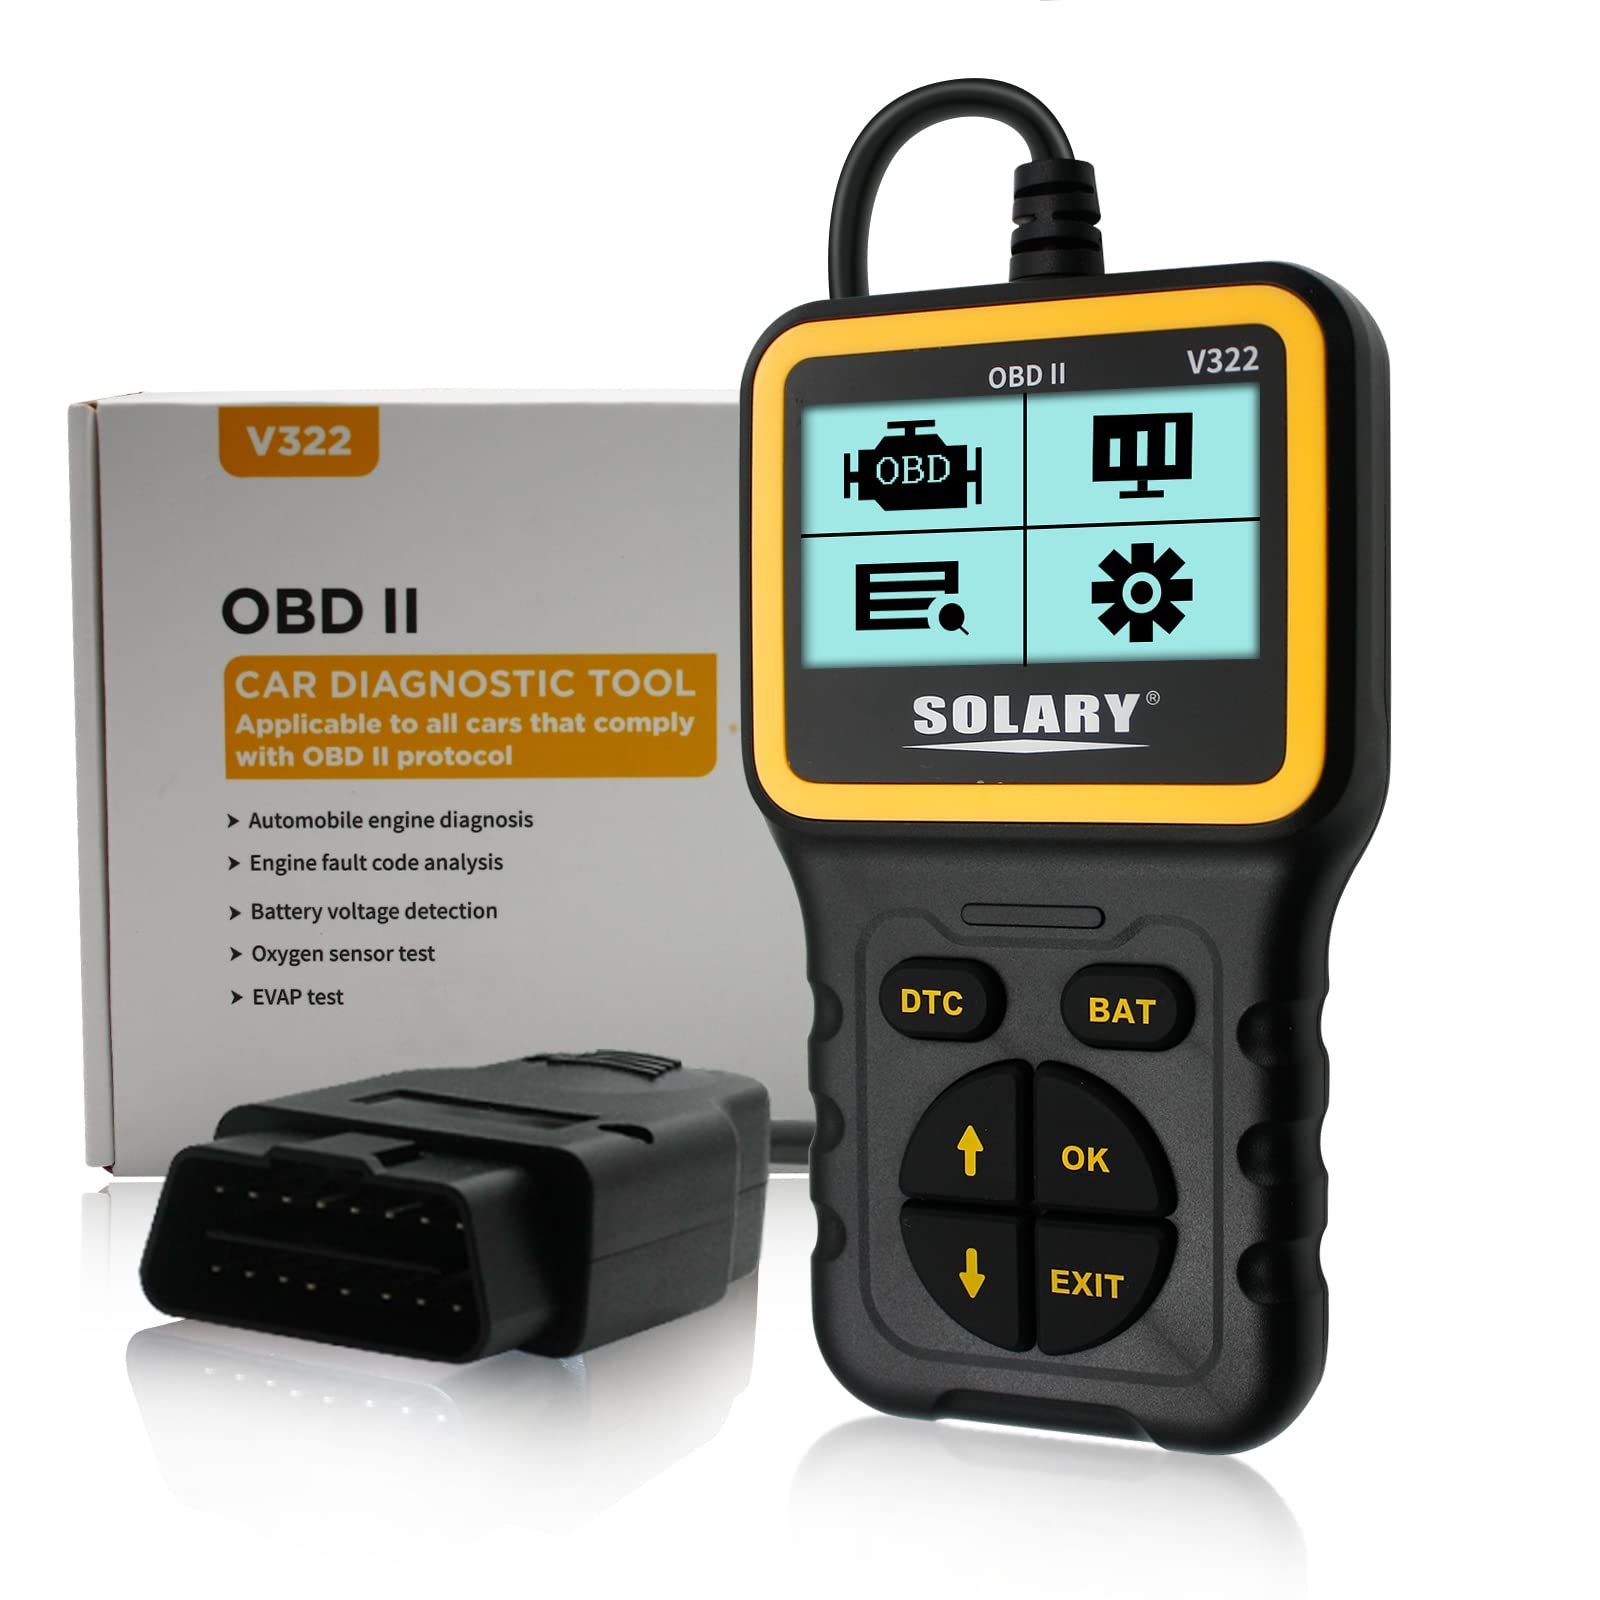 Solary OBD2 Scanner, V322 Professional OBD II Scanner Car Engine Fault Code Reader, CAN Diagnostic Scan Tool for All OBD II Cars - Auto Body Collision Repair Welding Products